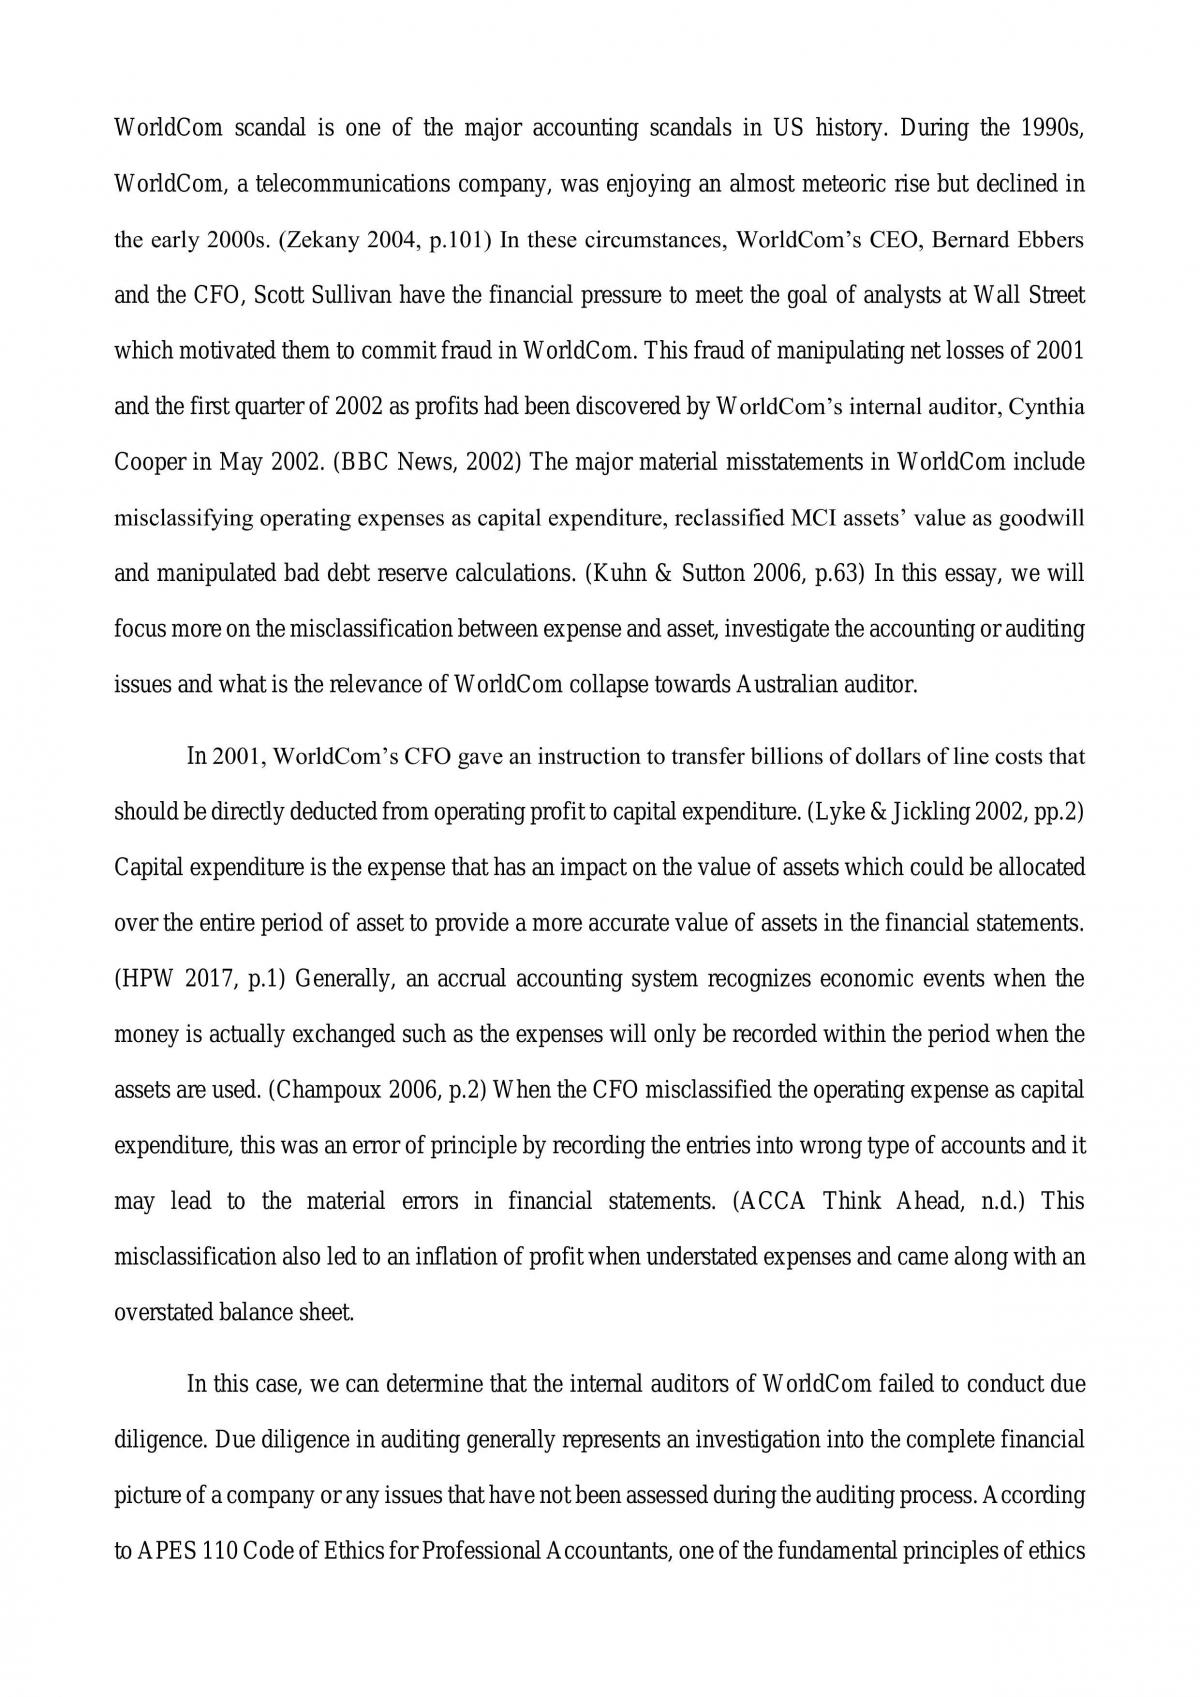 Essay - Auditing and accounting issues during WorldCom collapse - Page 2